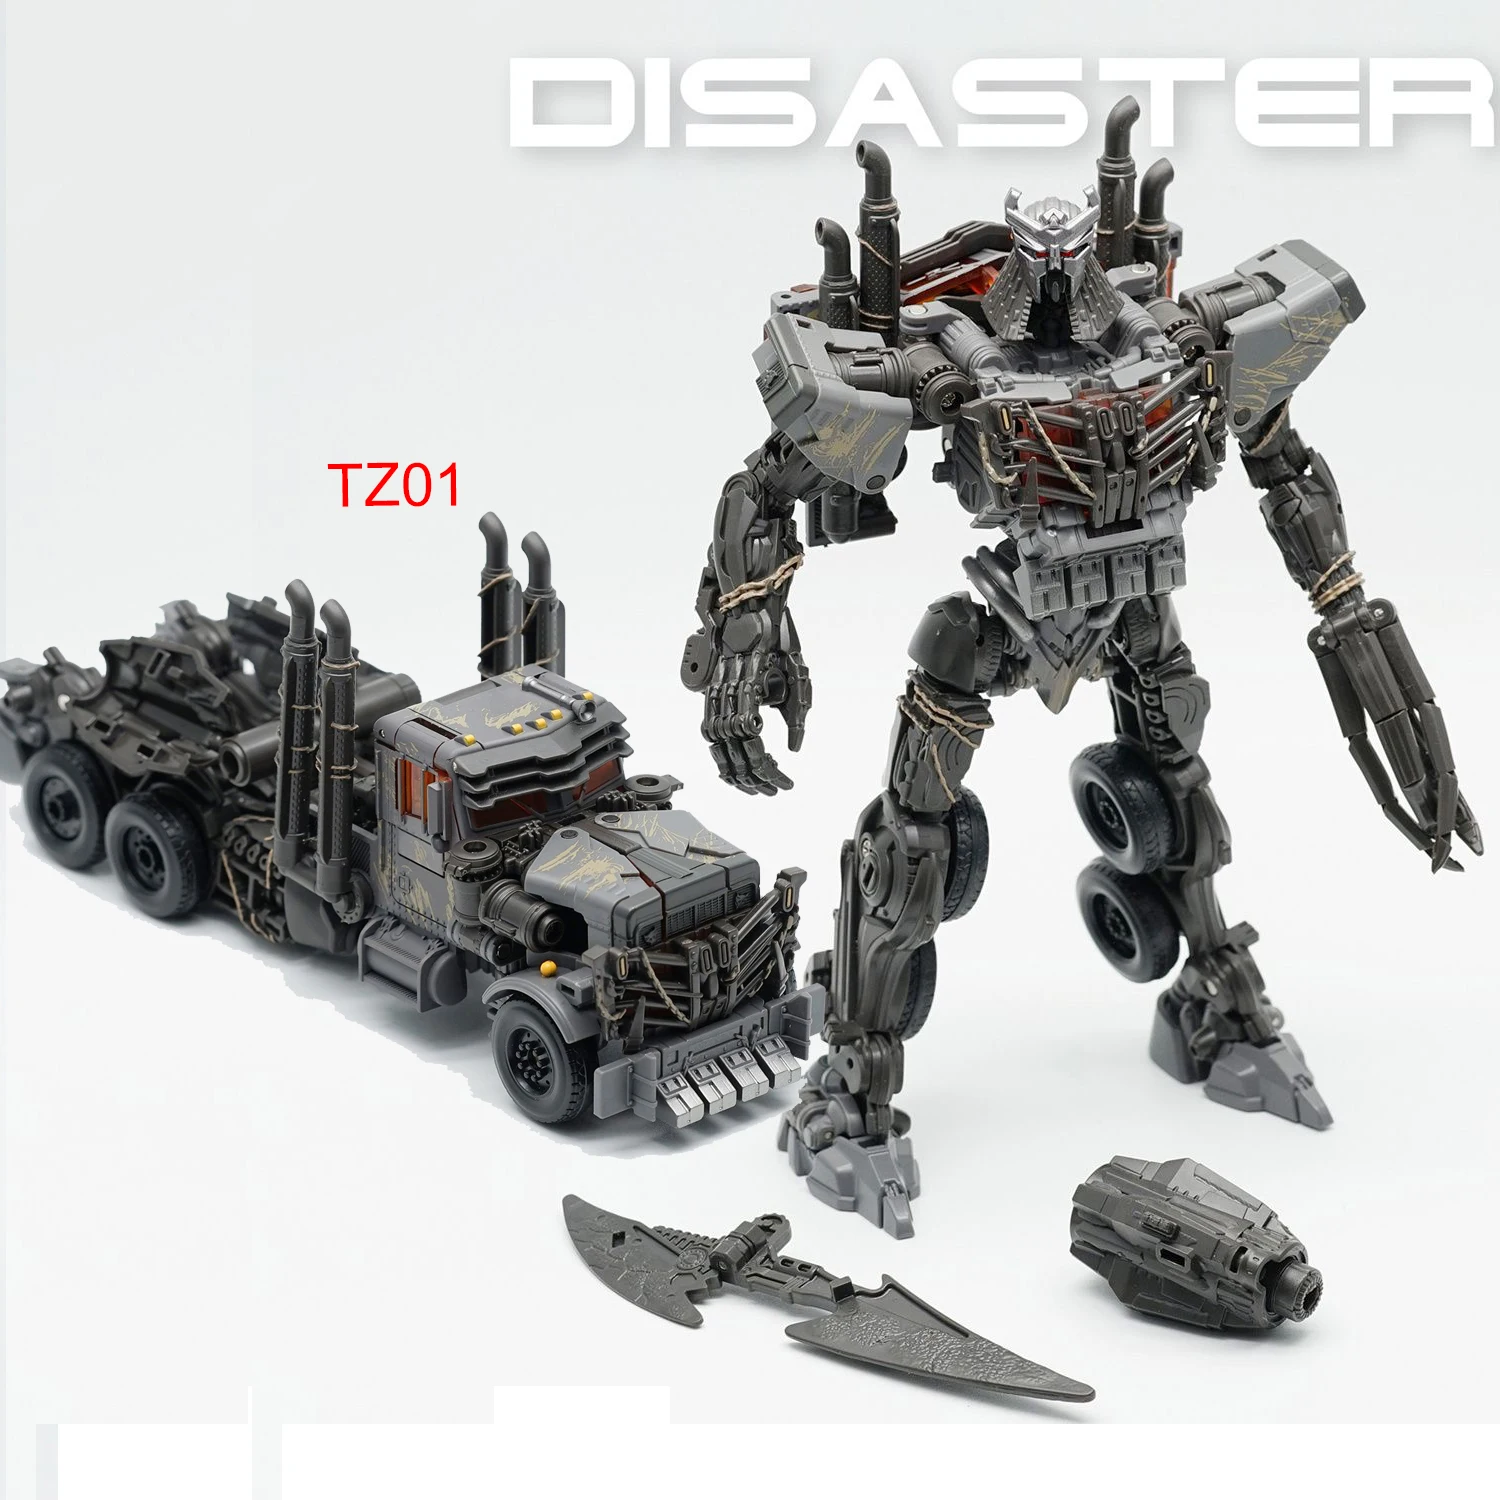 

DISASTER TZ01 Transformation Toy Scourge SS101 Rise of the Beasts Movie 7 Action Figure Deformation Robot Alloy Anime Model Gift